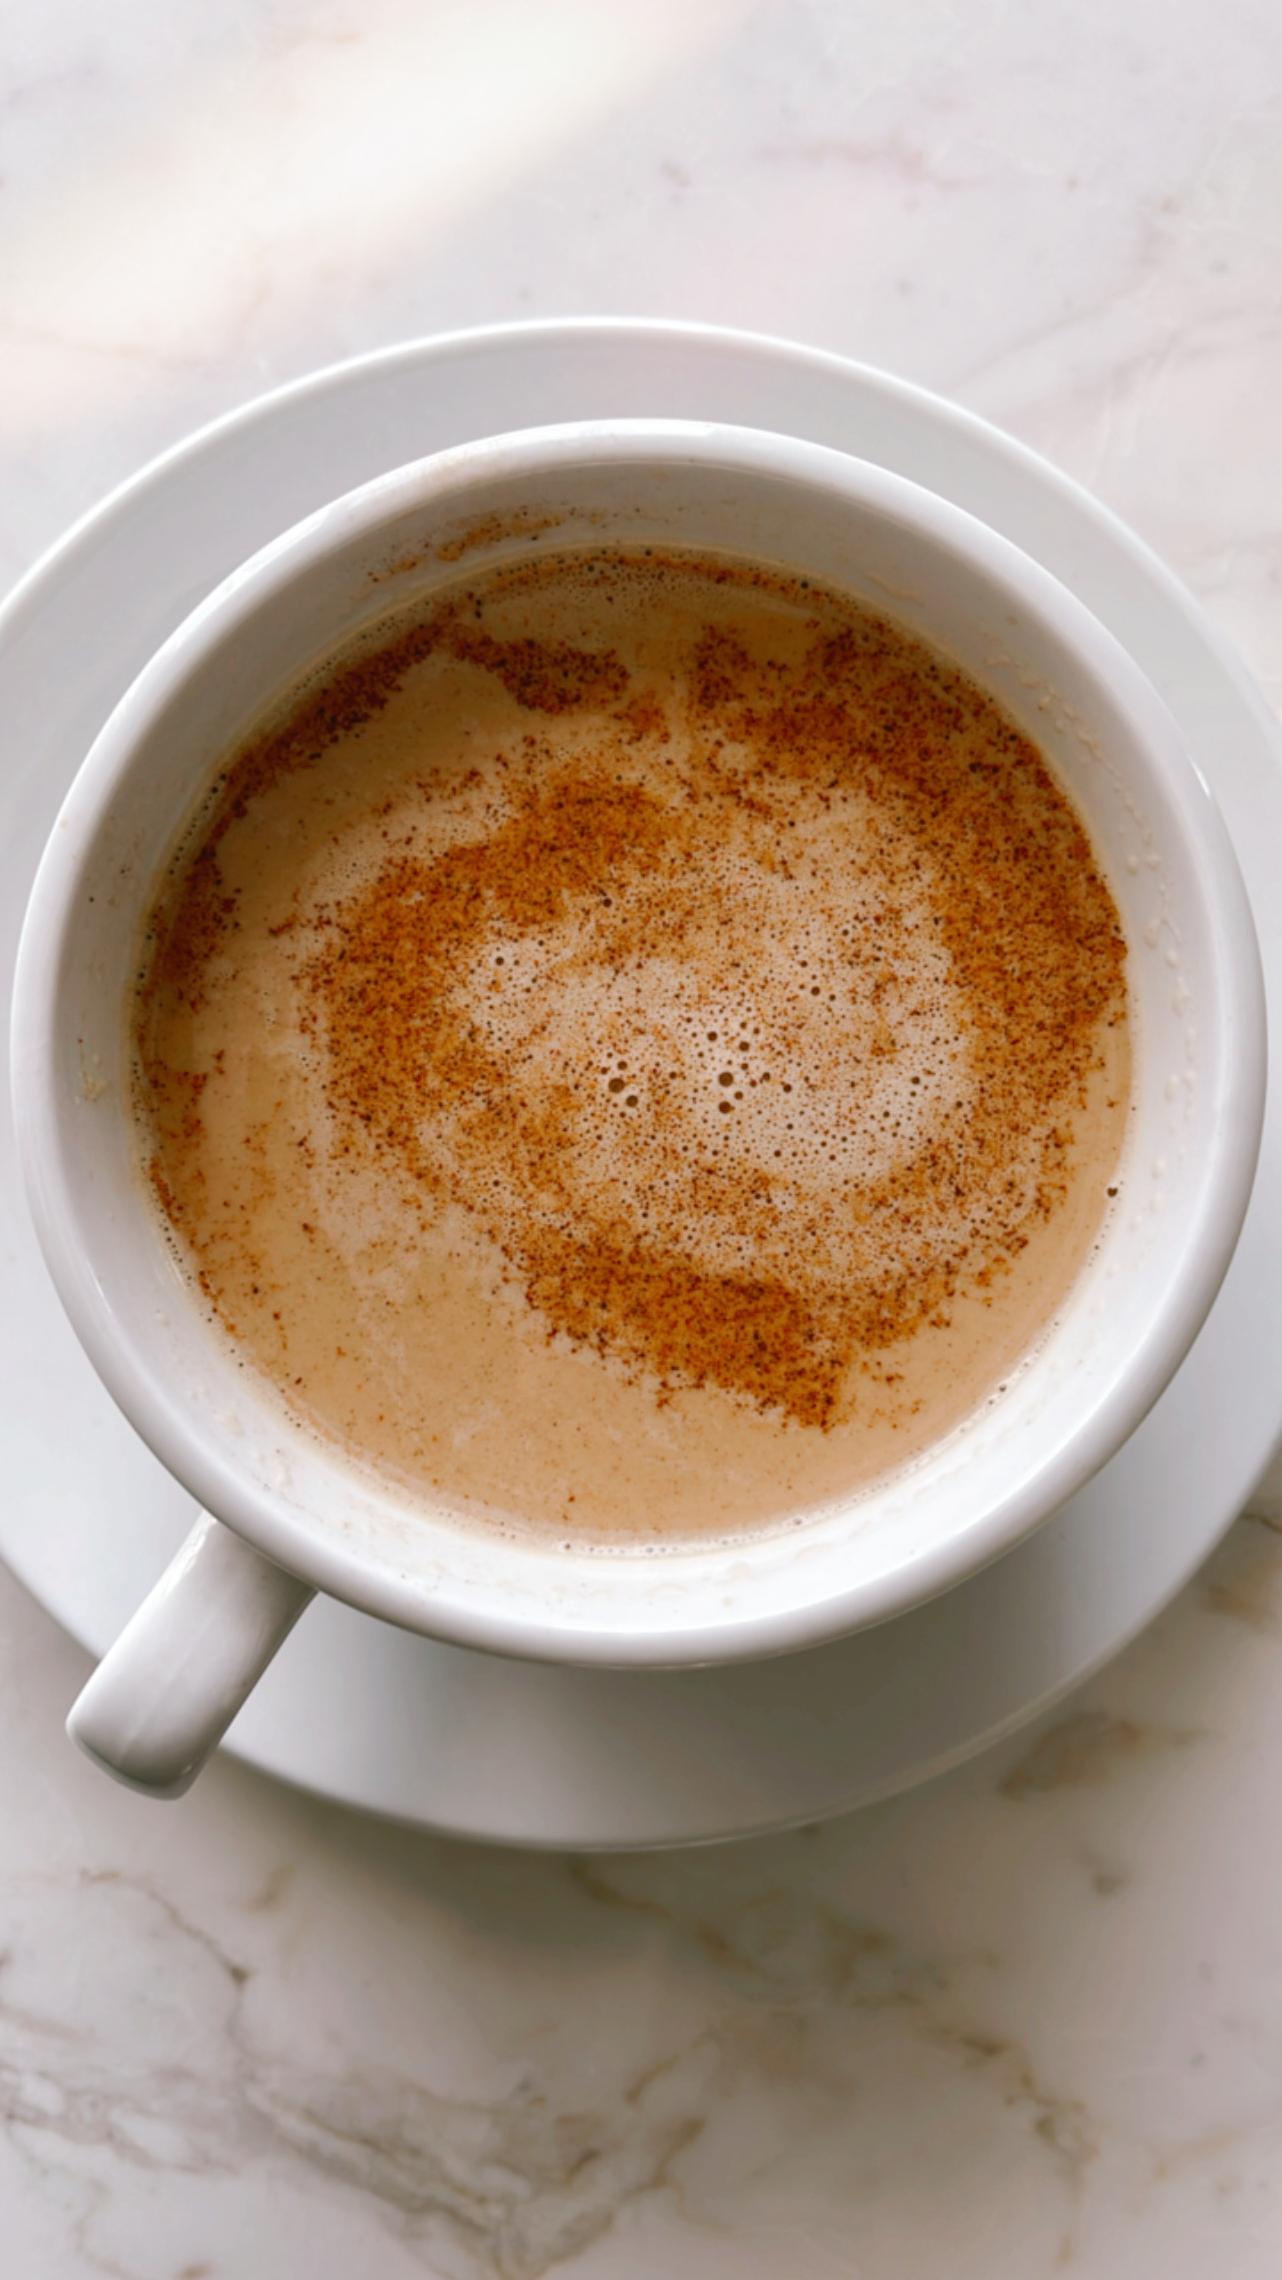  Satisfy your sweet tooth and caffeine cravings all in one cup with the mocha cafe au lait.